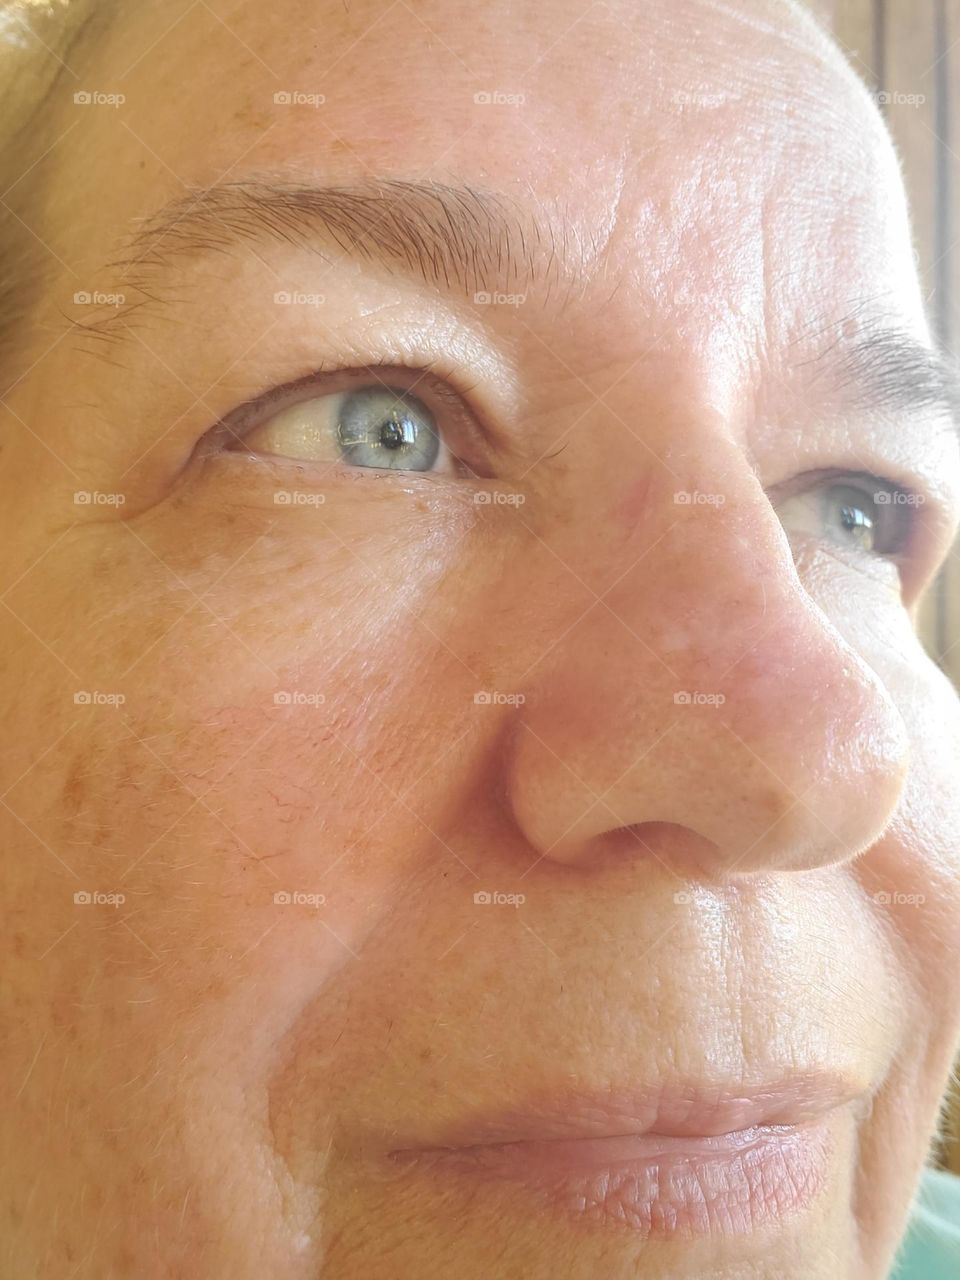 a smiling blue-eyed 63 year old woman who has no makeup on shows her unique face with her wrinkles, lines, age spots, rosacea and the scar from cancer on her nose